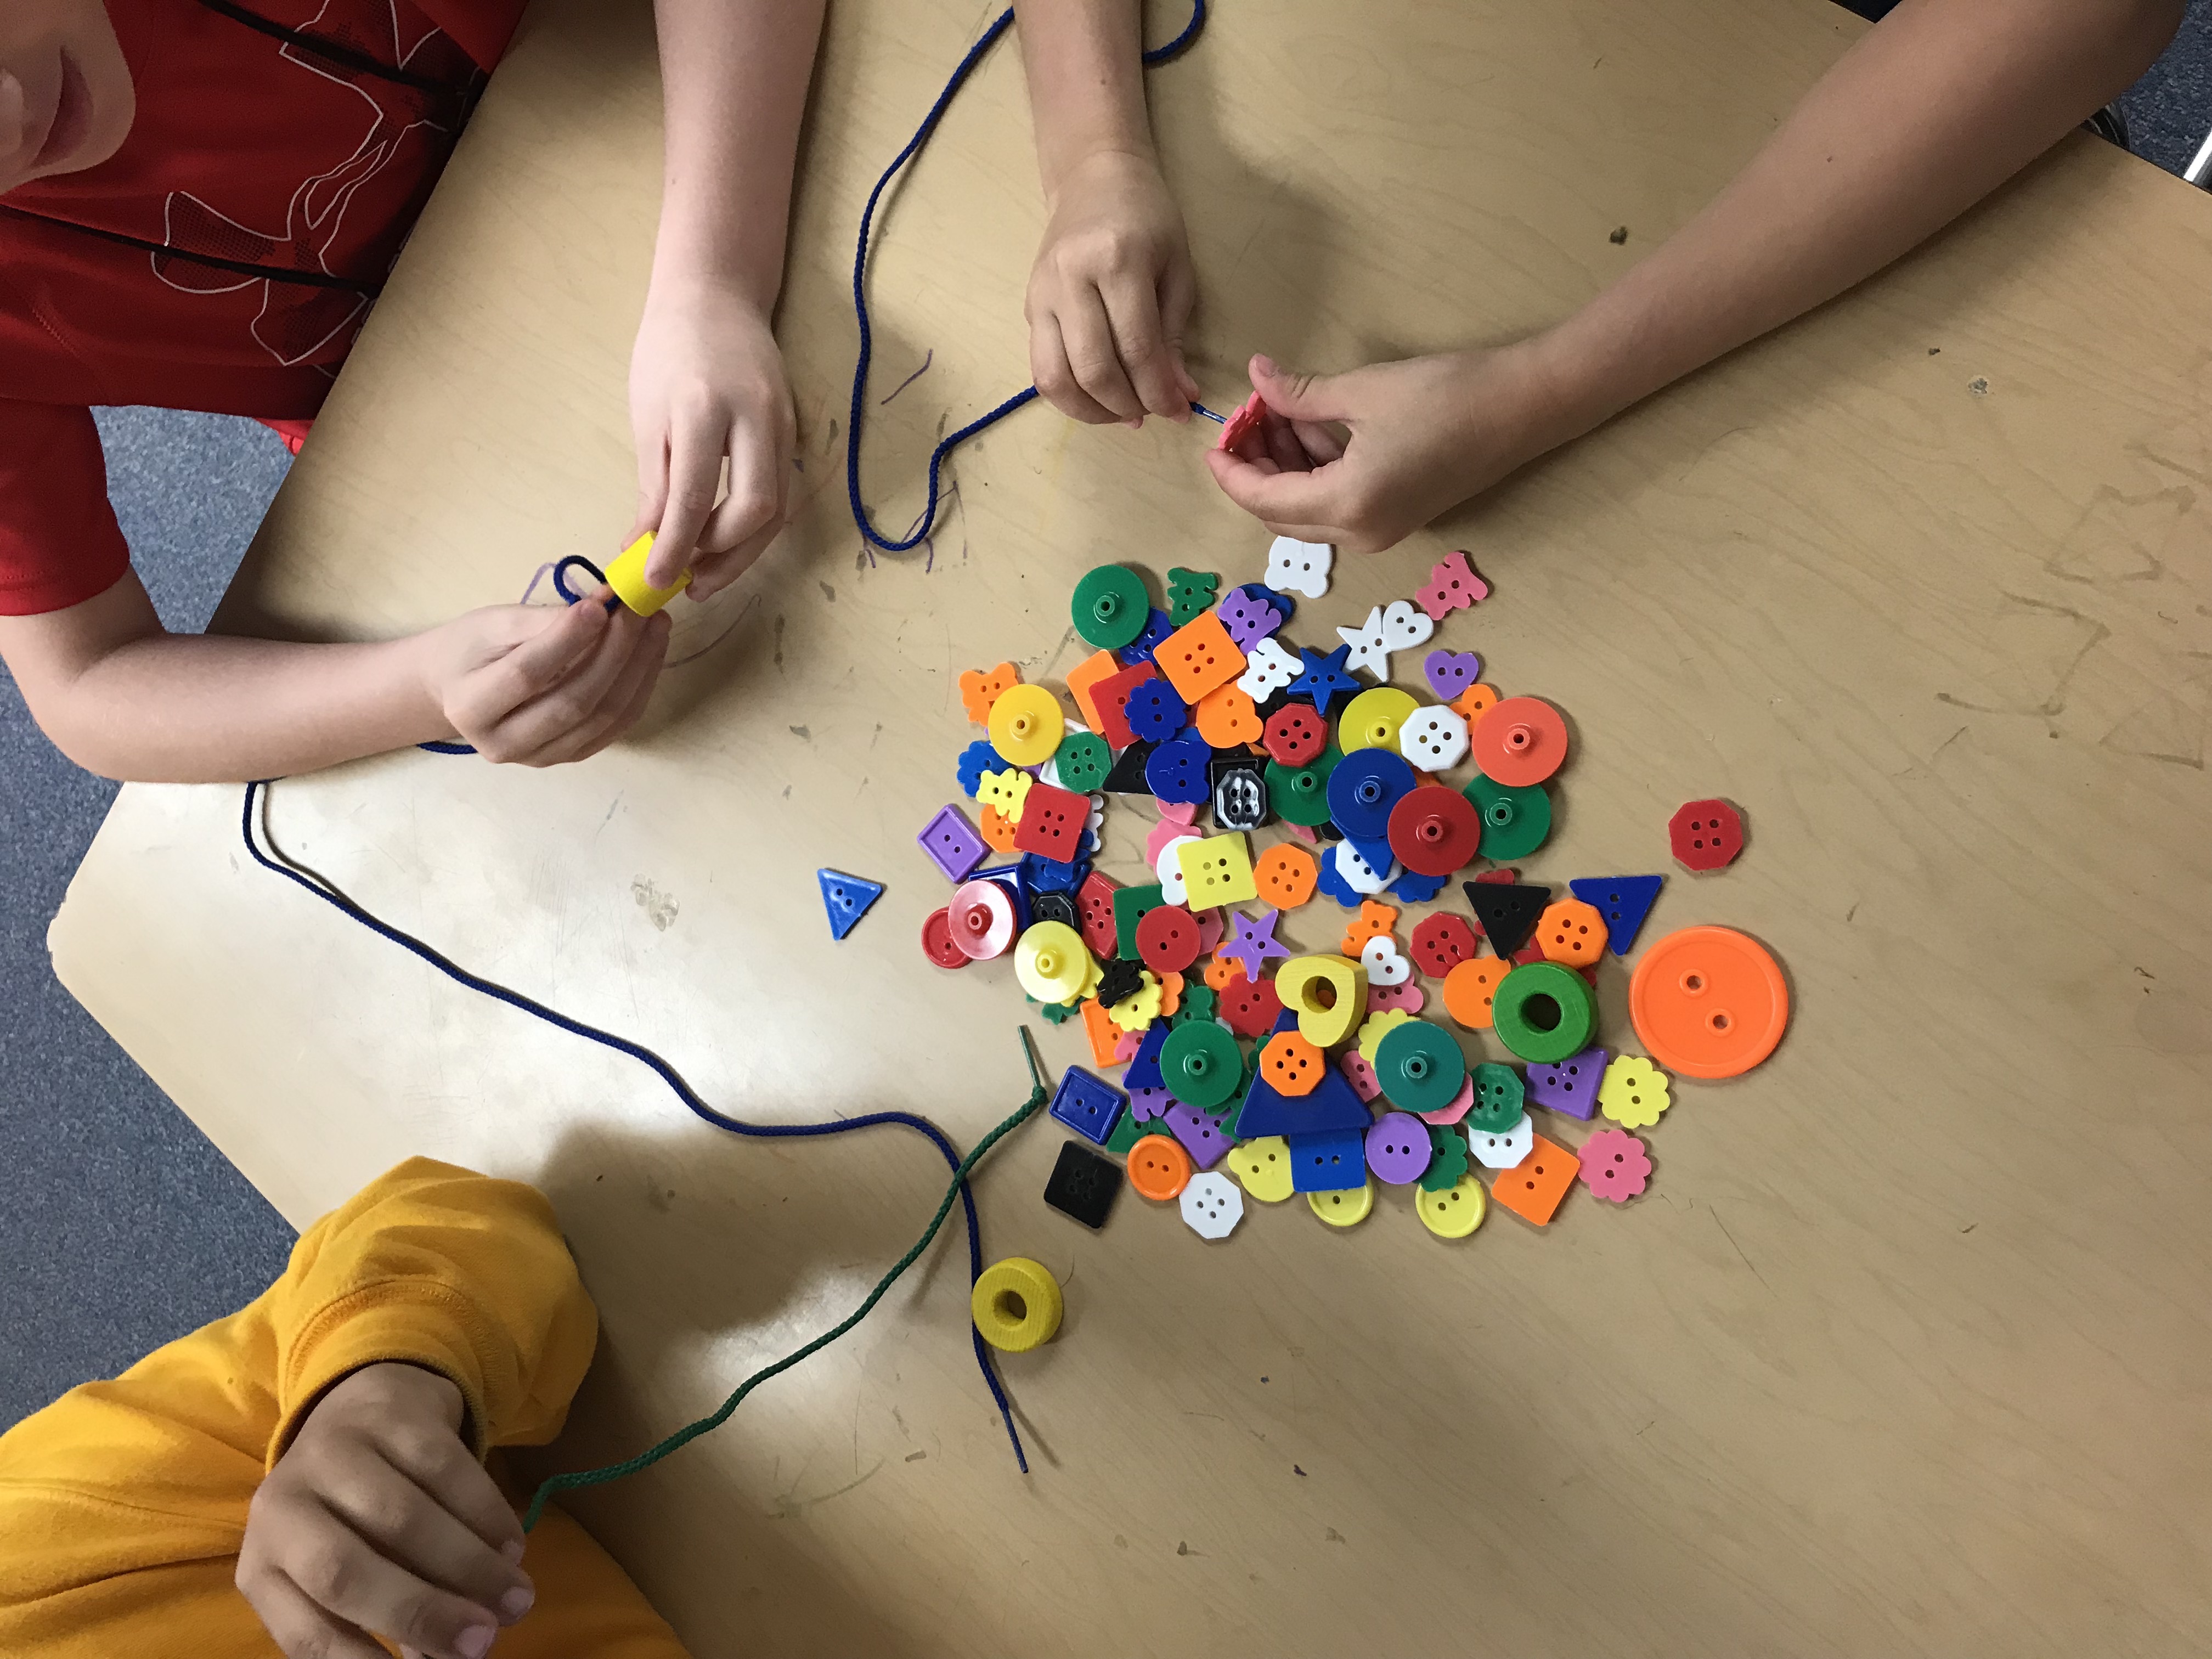 Kids playing with strings and buttons